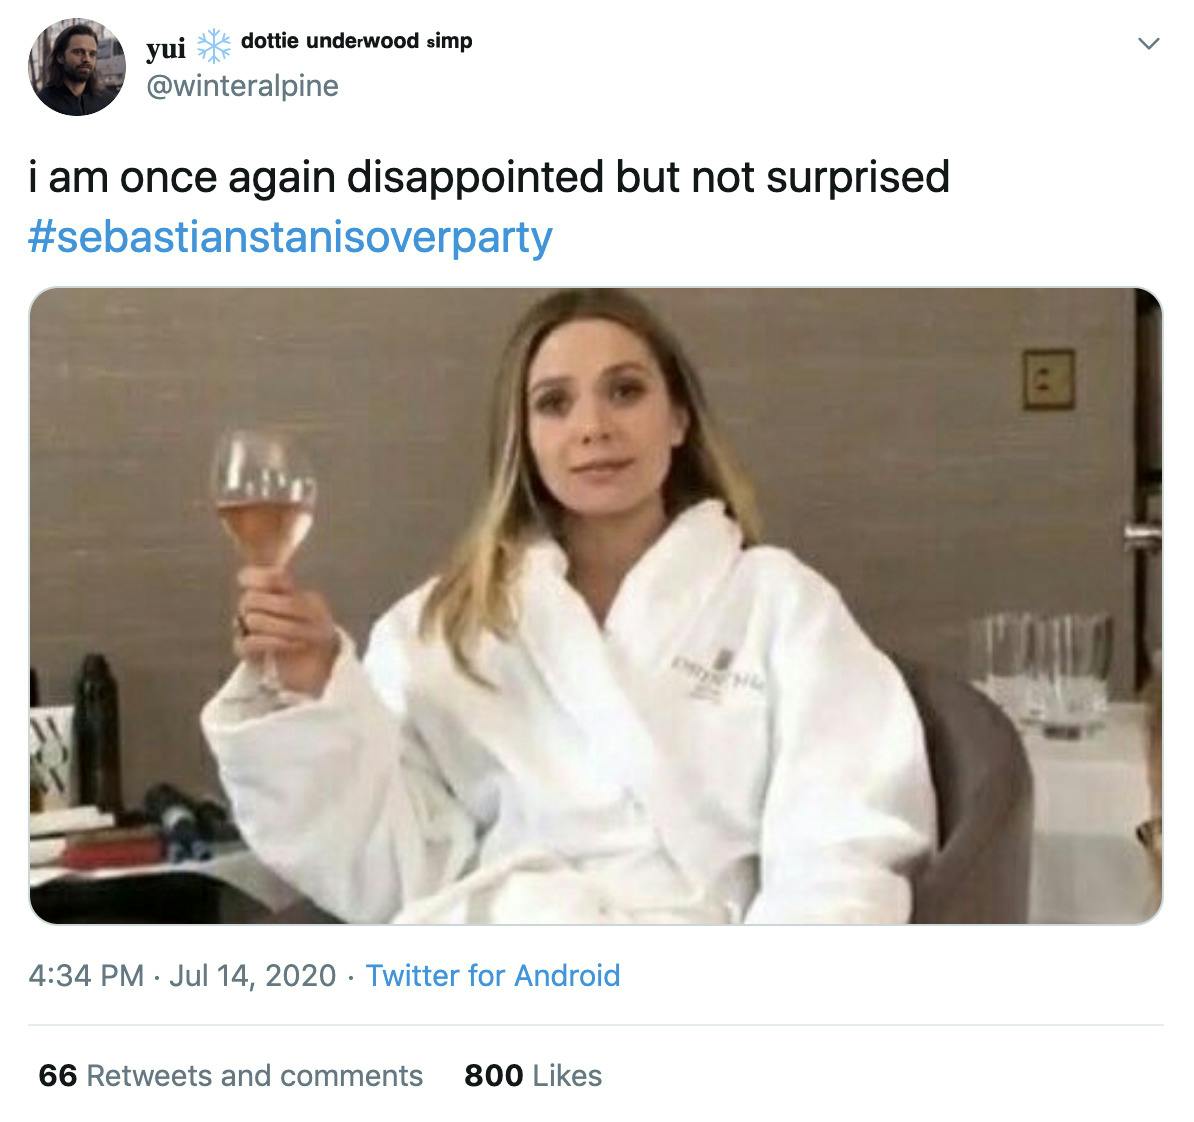 "I am once again disappointed but not surprised" gif of Elizabeth Olsen drinking wine in a bath robe